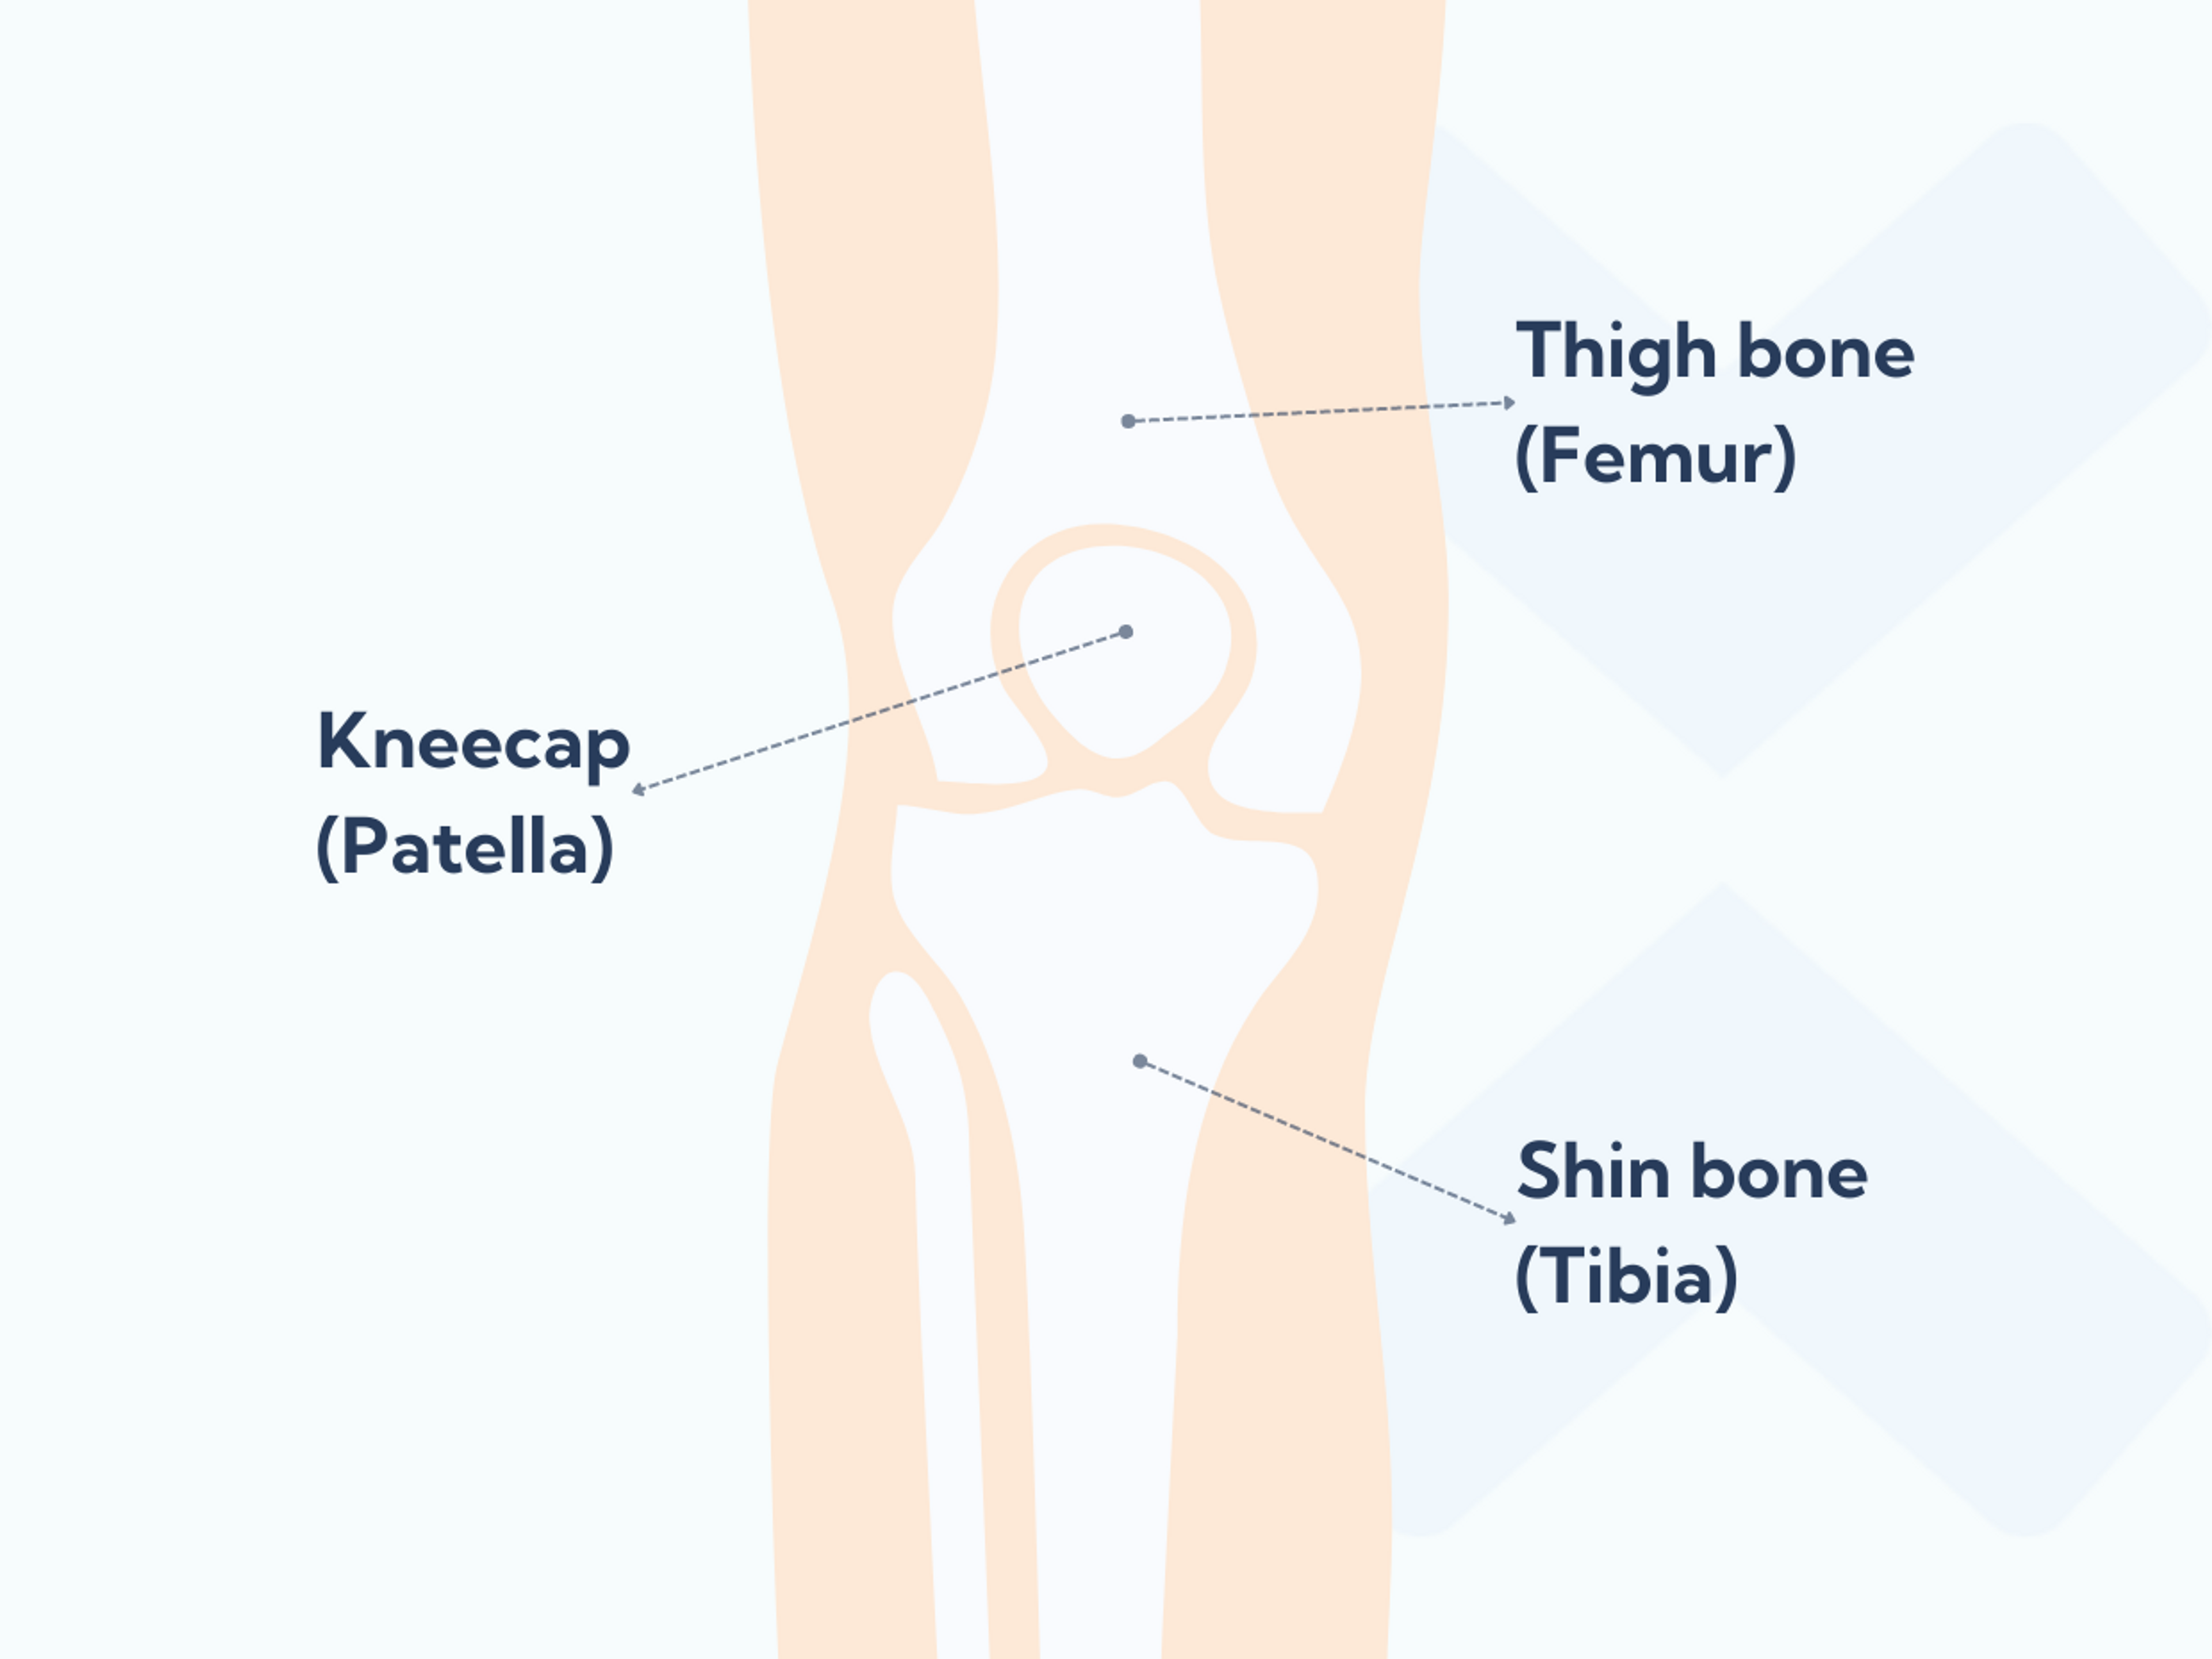 The anatomy of the patellofemoral joint showing the kneecap, shin bone and thigh bone.